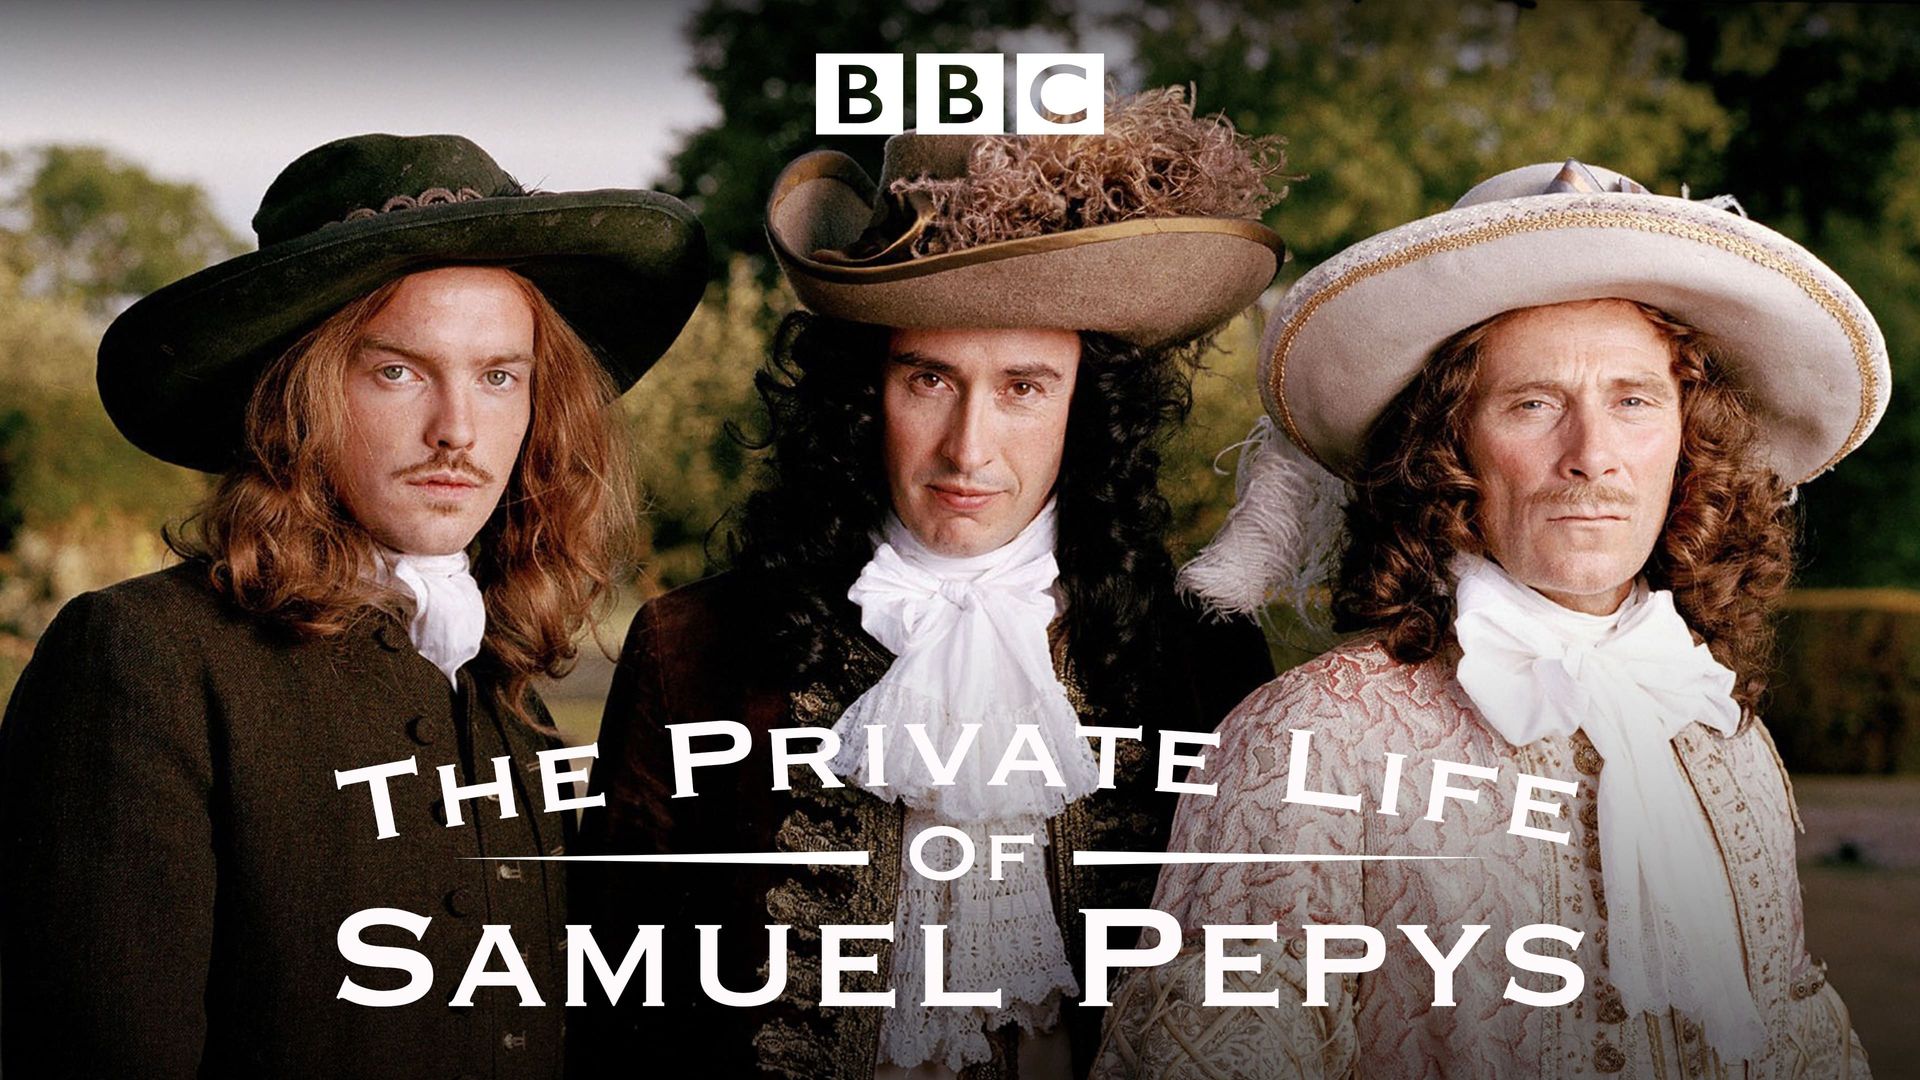 The Private Life of Samuel Pepys background